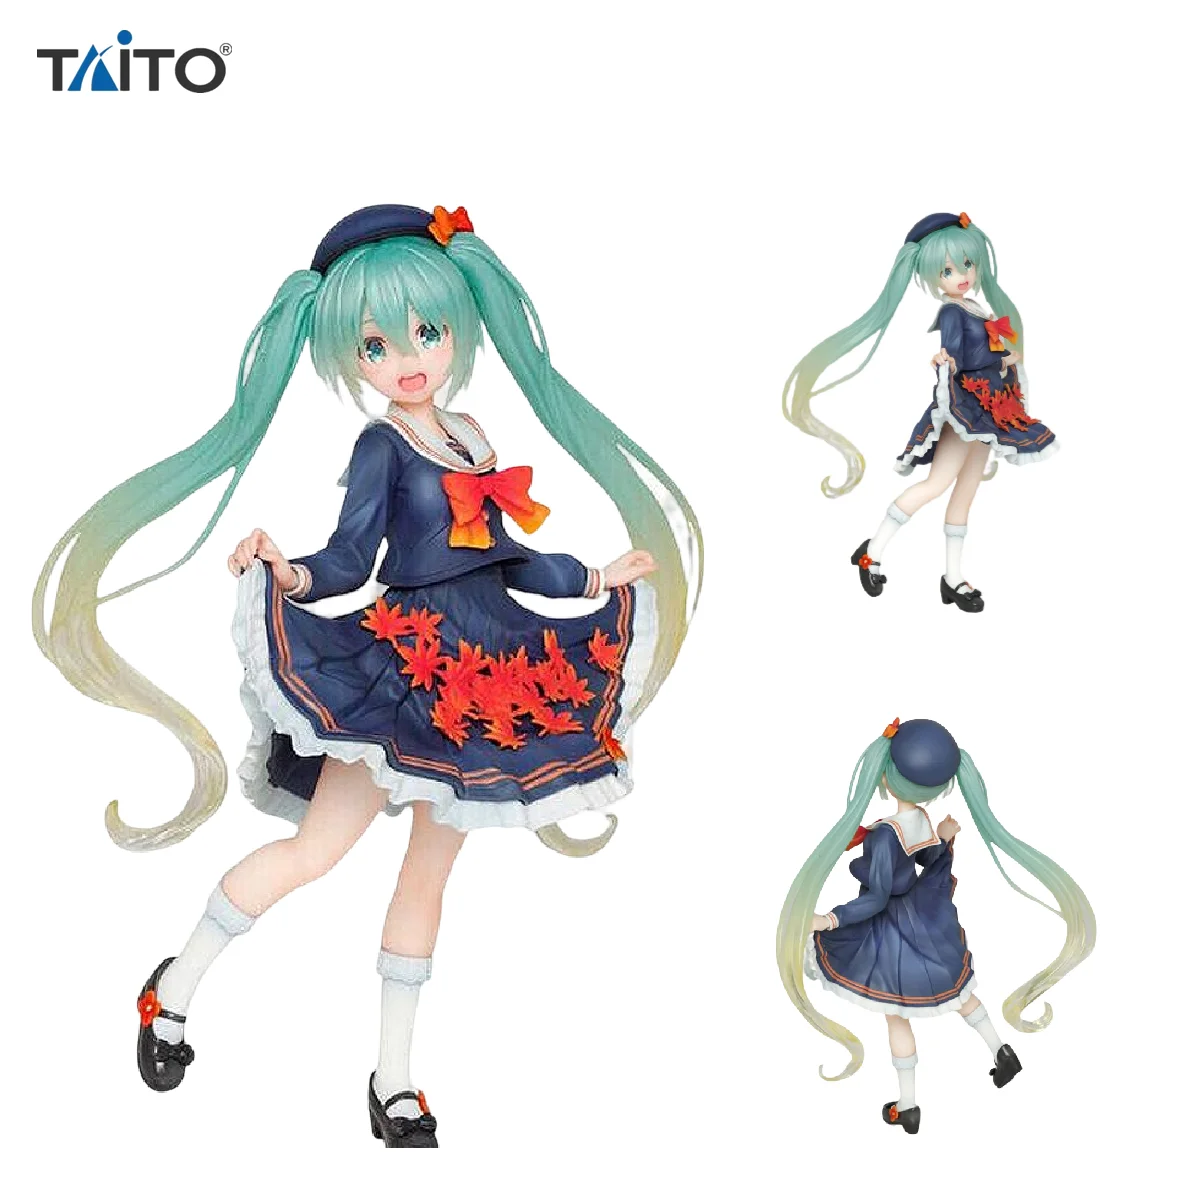 

TAITO VOCALOID Hatsune Miku Four Seasons Autumn Ver. Finished Anime Figure Collection Gift for Friends